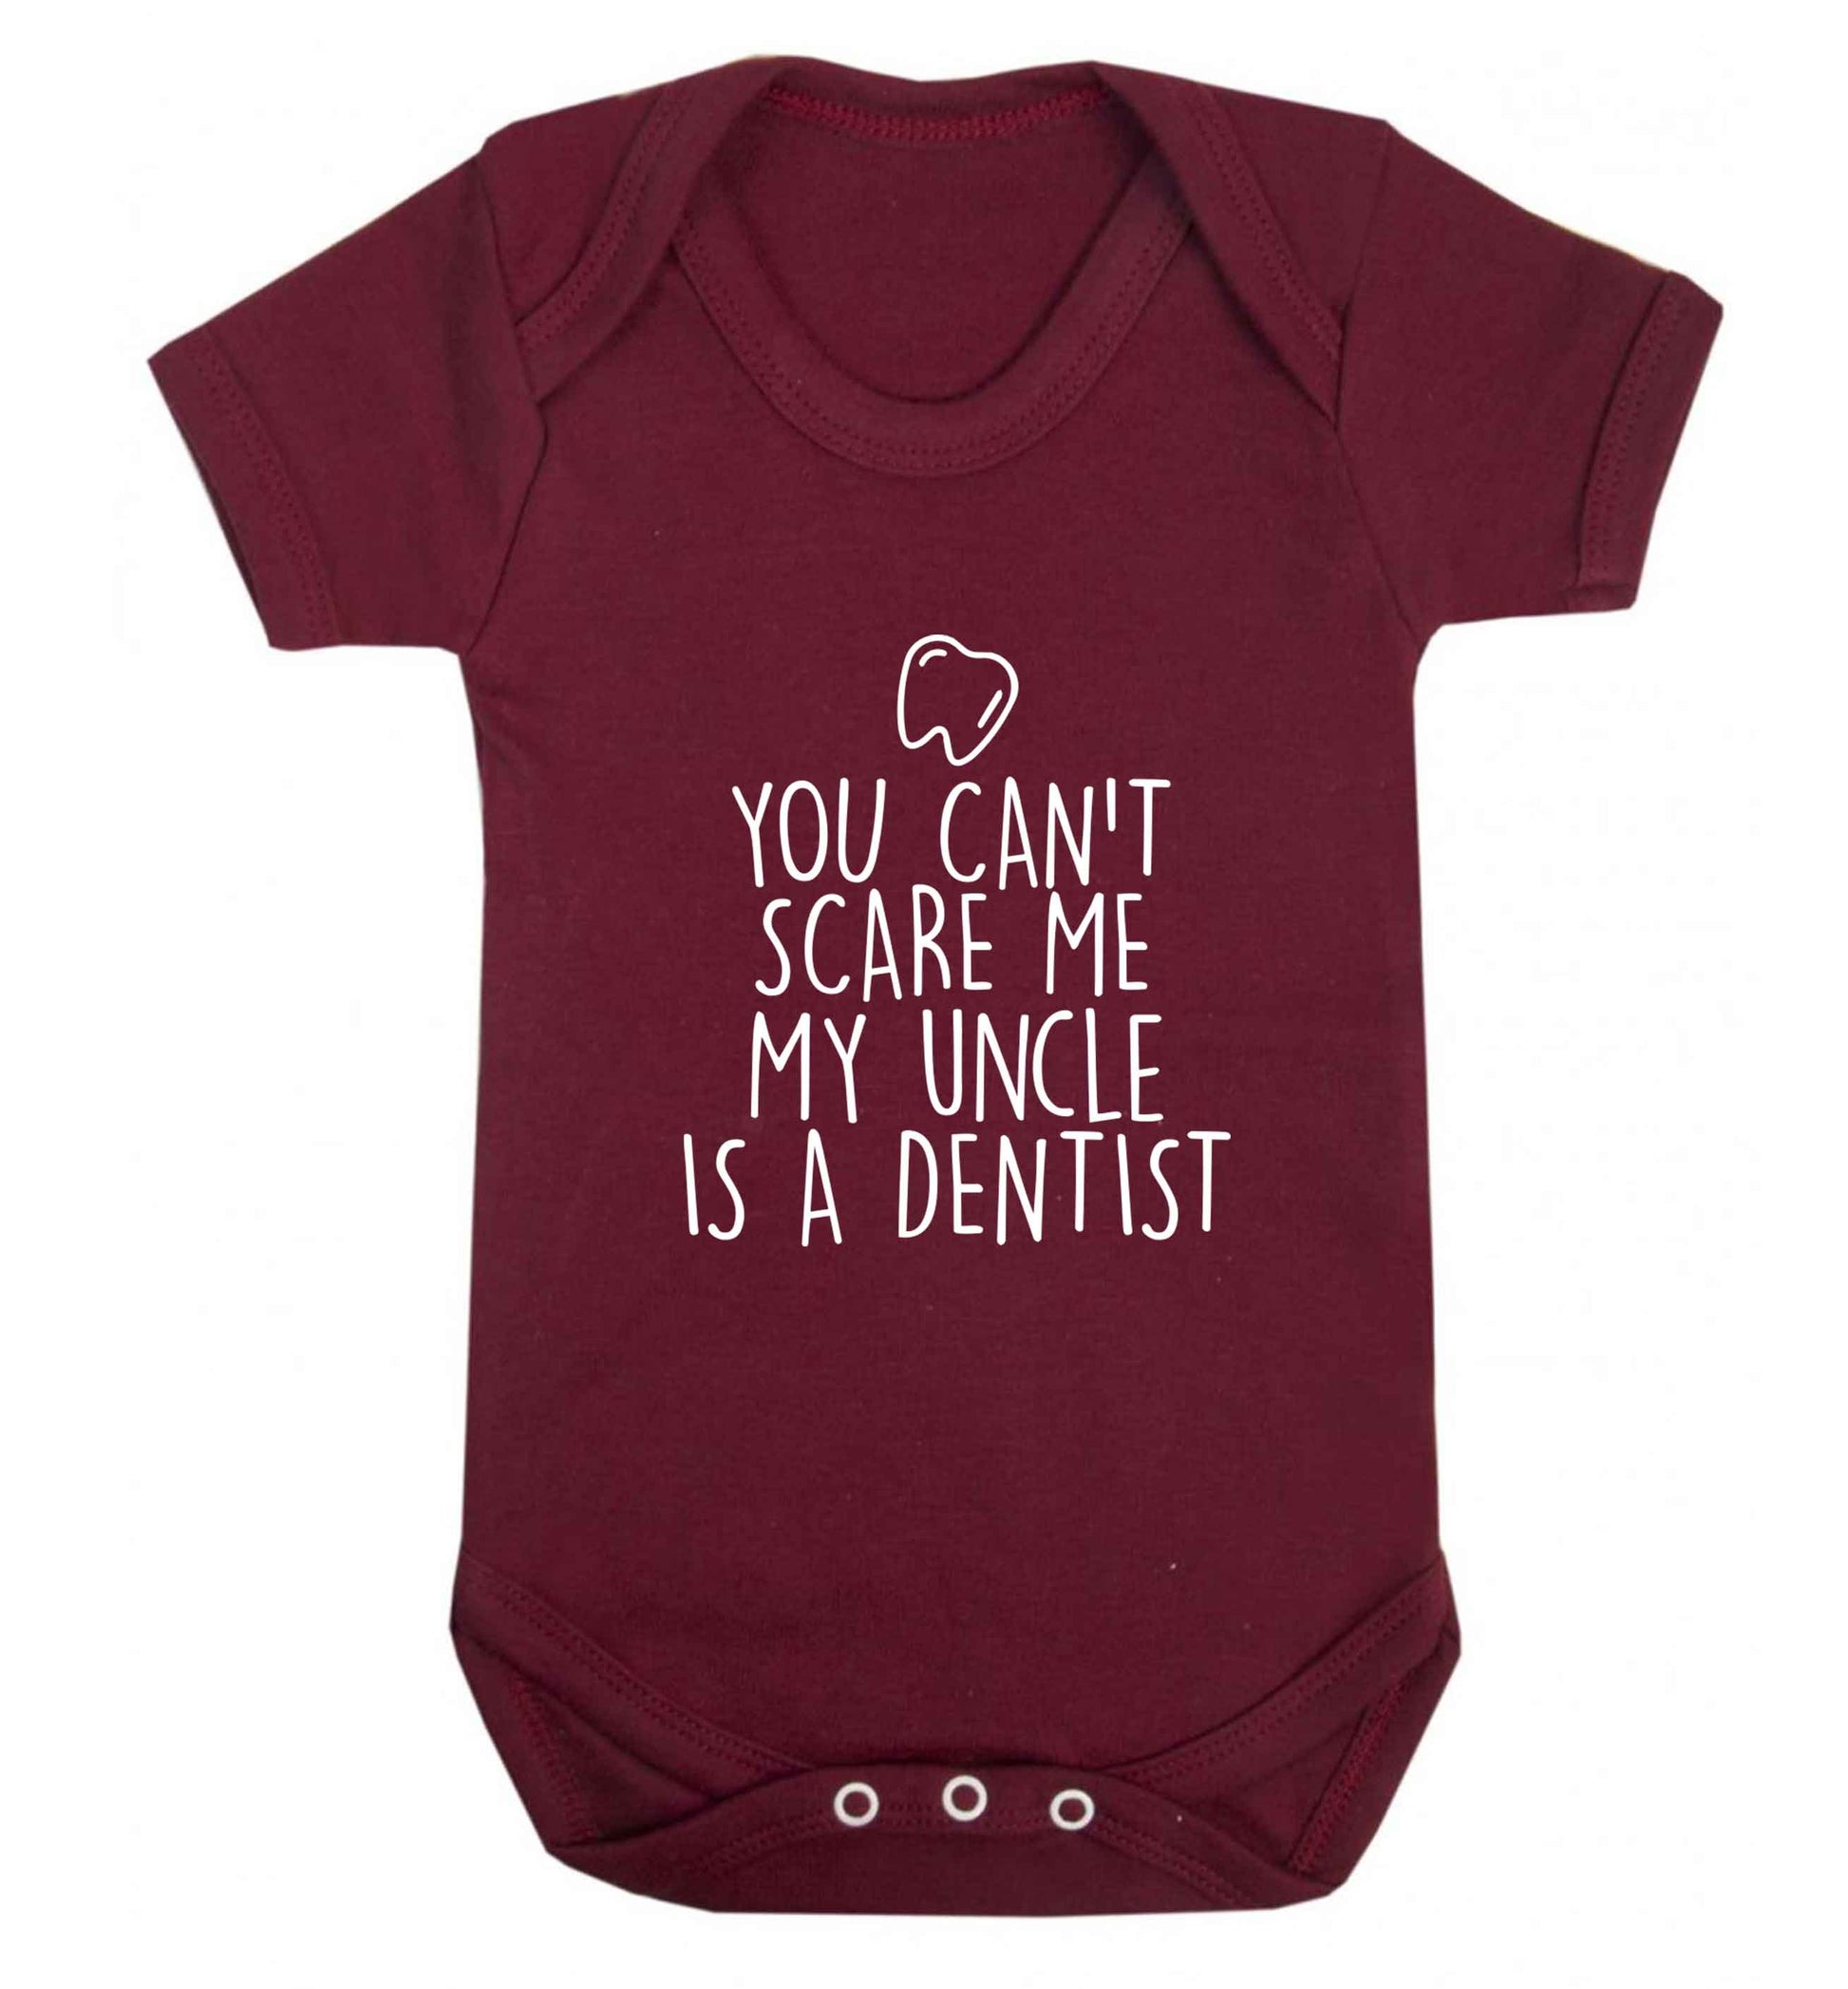 You can't scare me my uncle is a dentist baby vest maroon 18-24 months